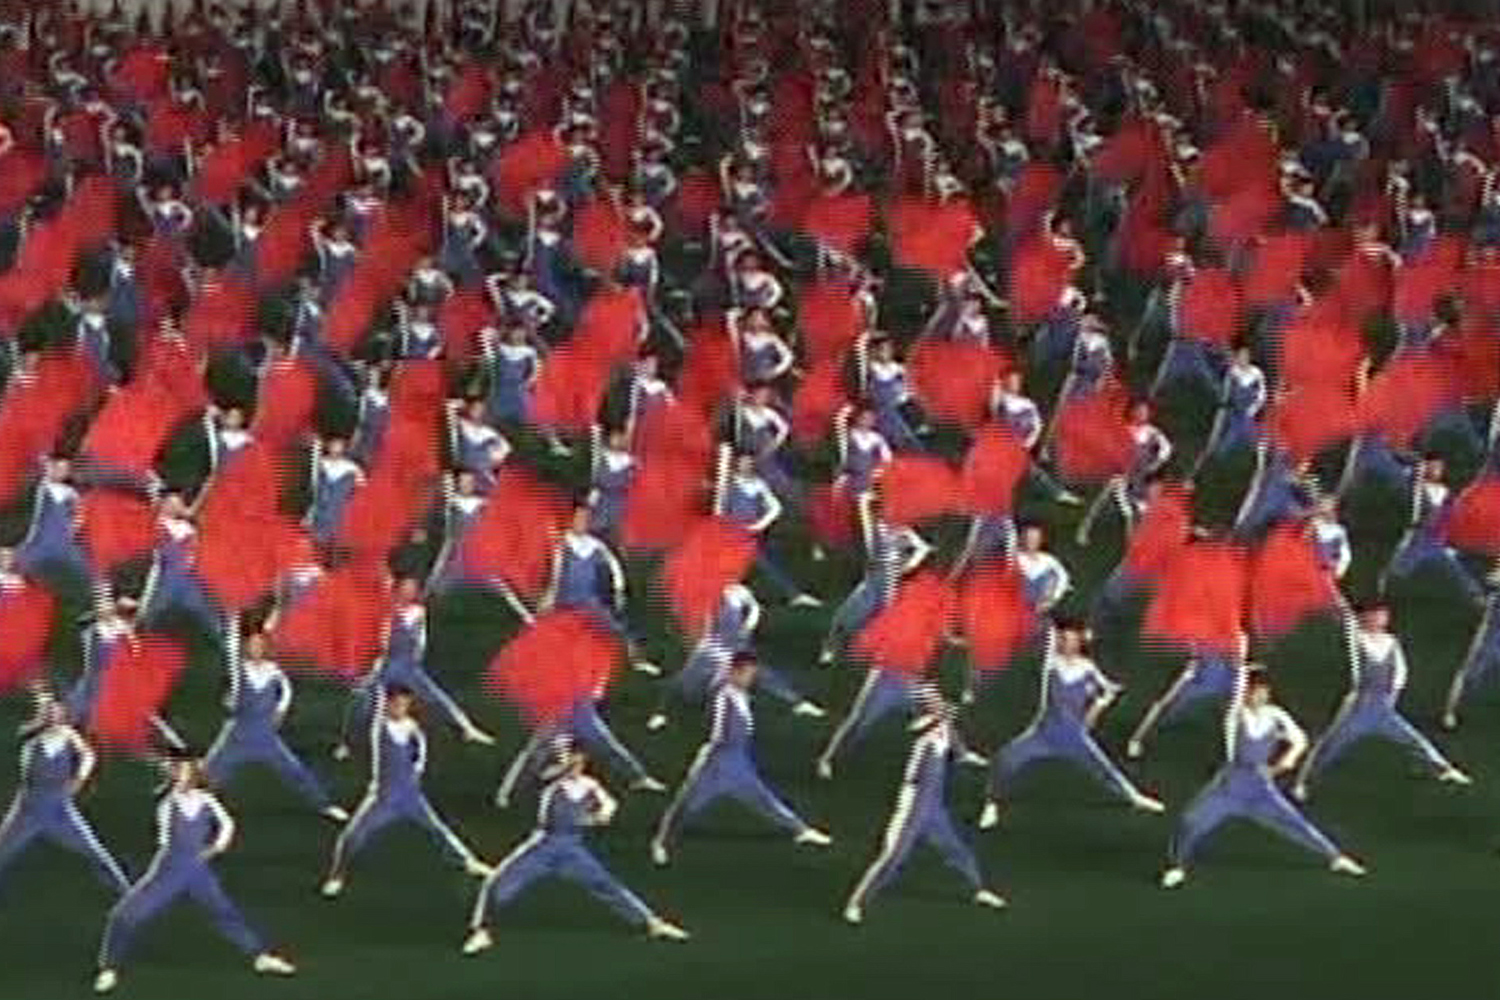 In this image taken from a video footage shot by APTN, a group of dancers performs as part of Arirang festival in Pyongyang, North Korea, Monday, Aug. 10, 2009.